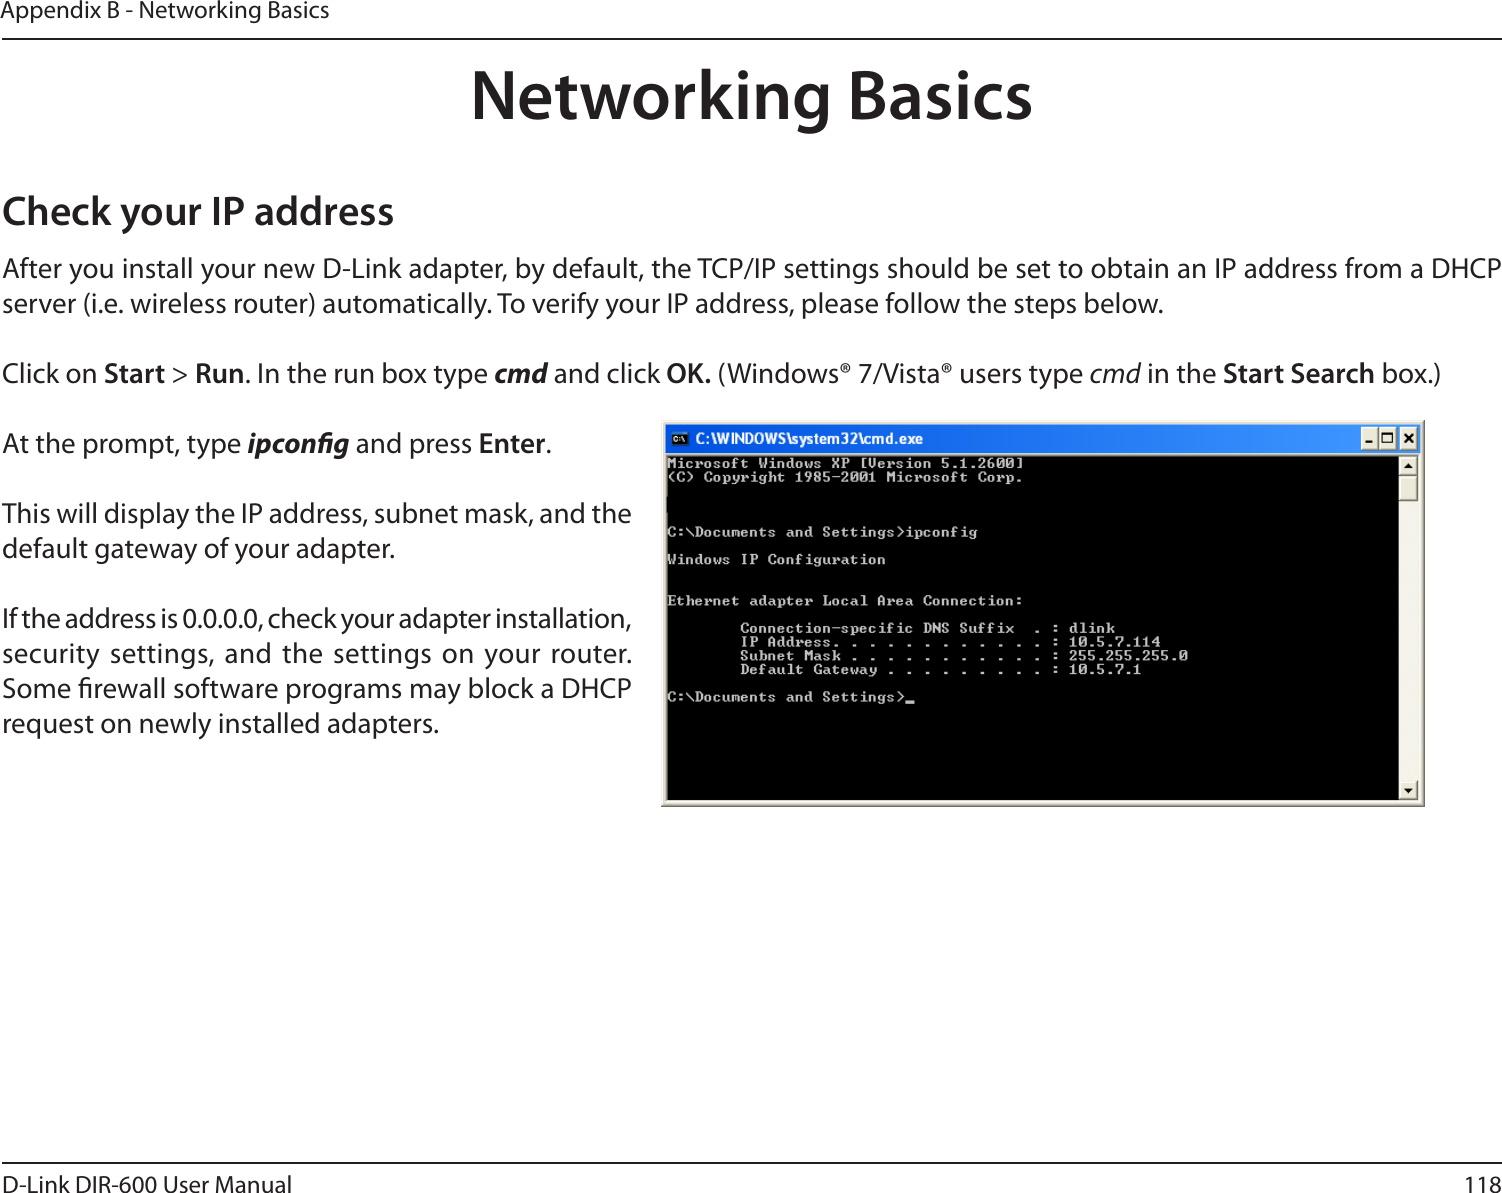 118D-Link DIR-600 User ManualAppendix B - Networking BasicsNetworking BasicsCheck your IP addressAfter you install your new D-Link adapter, by default, the TCP/IP settings should be set to obtain an IP address from a DHCP server (i.e. wireless router) automatically. To verify your IP address, please follow the steps below.Click on Start &gt; Run. In the run box type cmd and click OK. (Windows® 7/Vista® users type cmd in the Start Search box.)At the prompt, type ipcong and press Enter.This will display the IP address, subnet mask, and the default gateway of your adapter.If the address is 0.0.0.0, check your adapter installation, security  settings, and  the settings on your router. Some rewall software programs may block a DHCP request on newly installed adapters. 